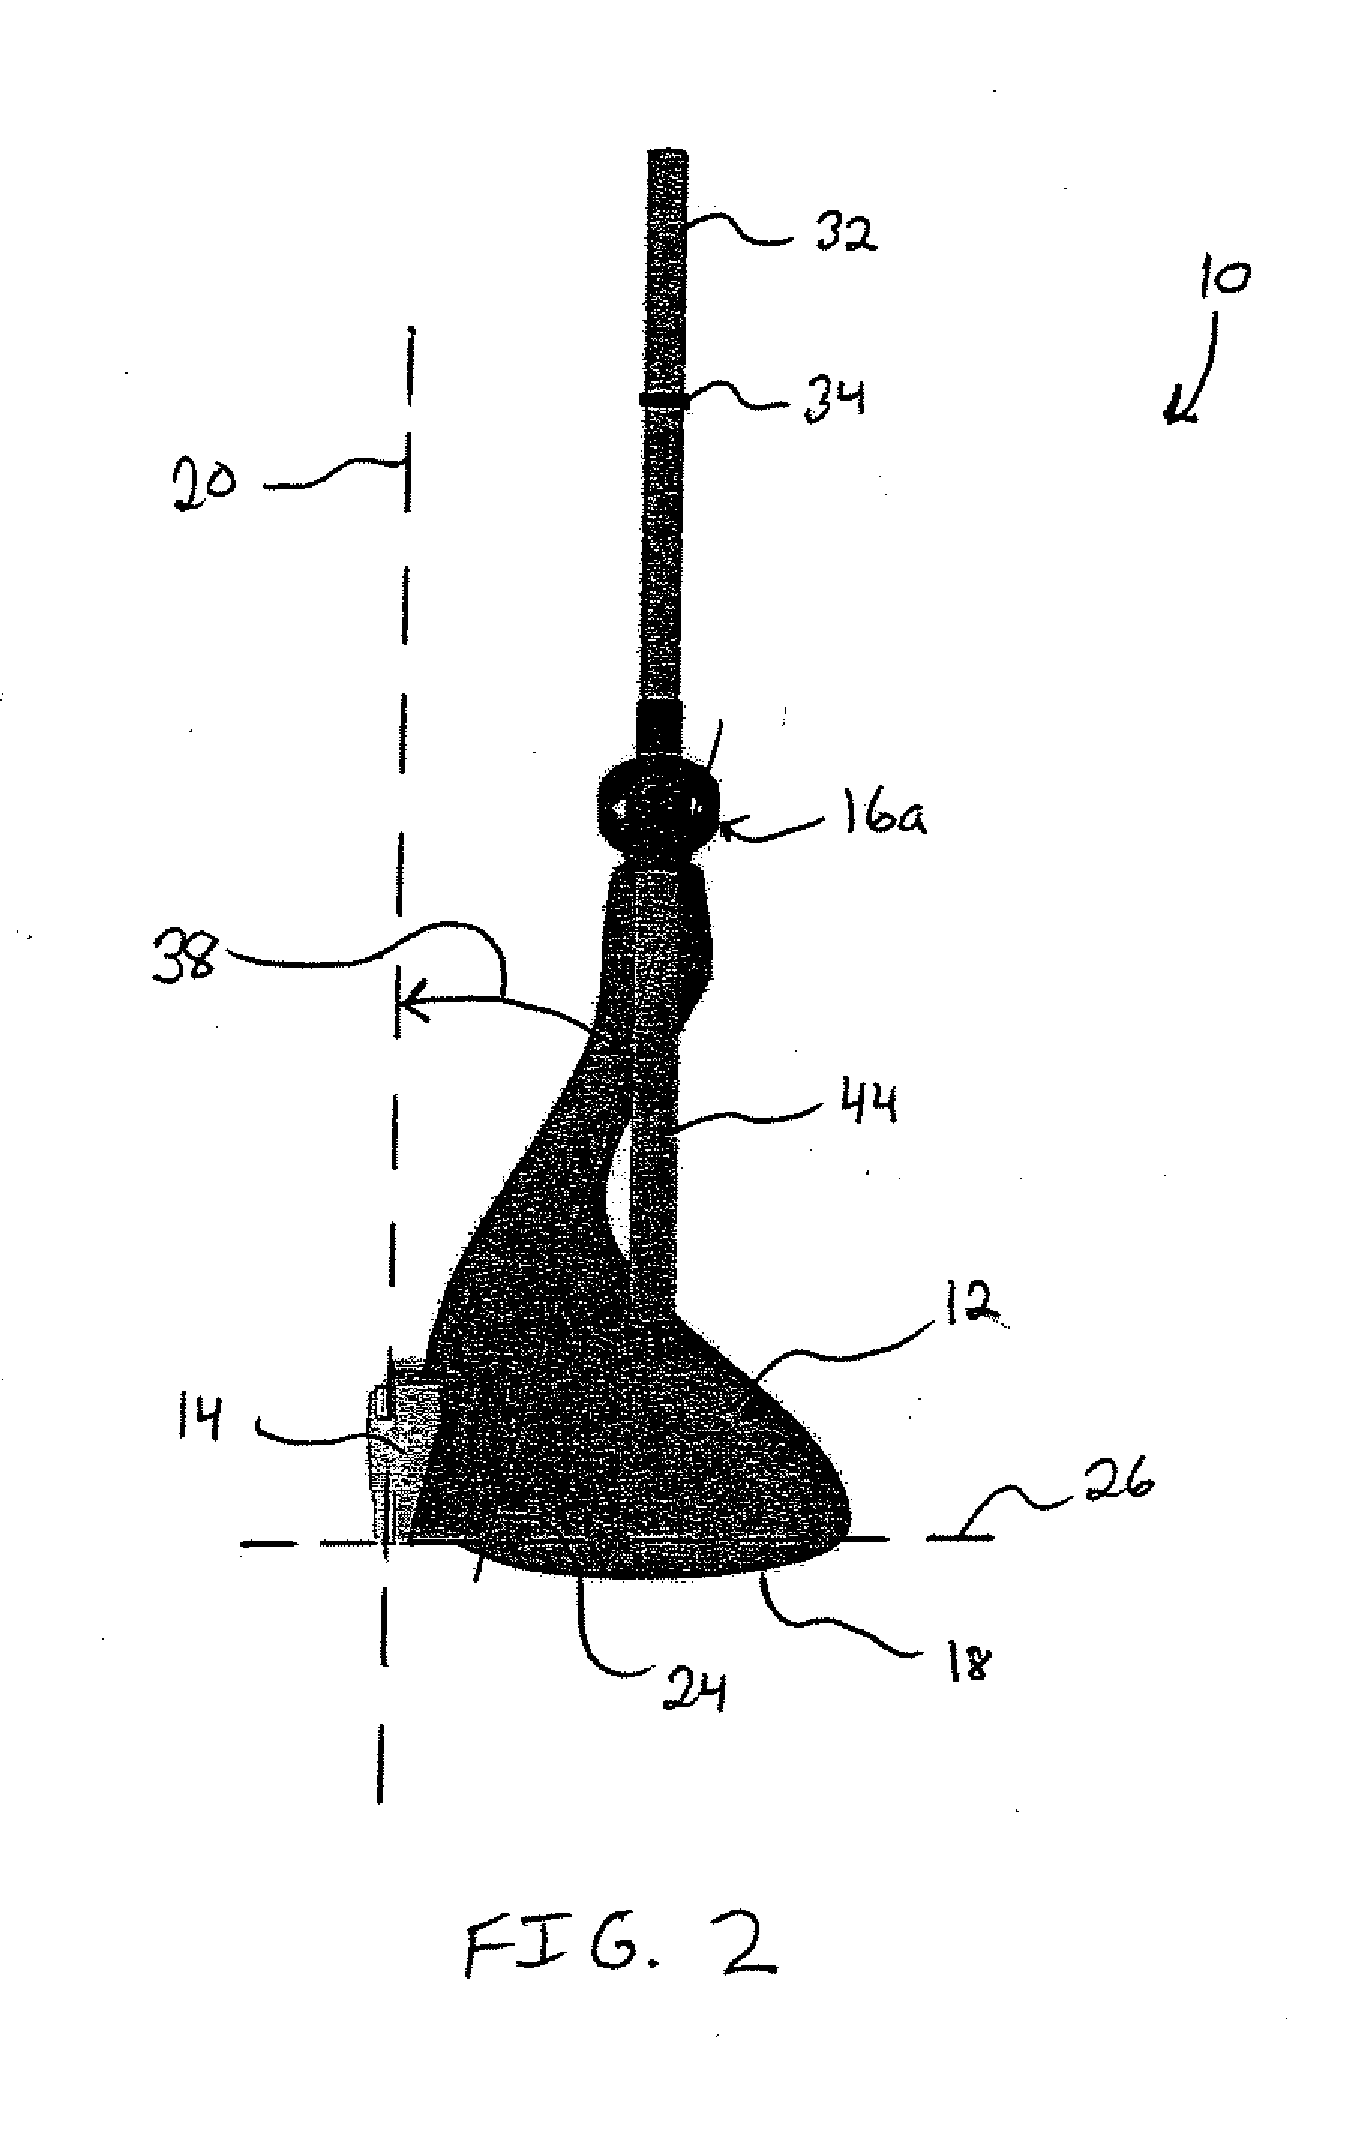 Apparatus and method for guiding a medical device in multiple planes